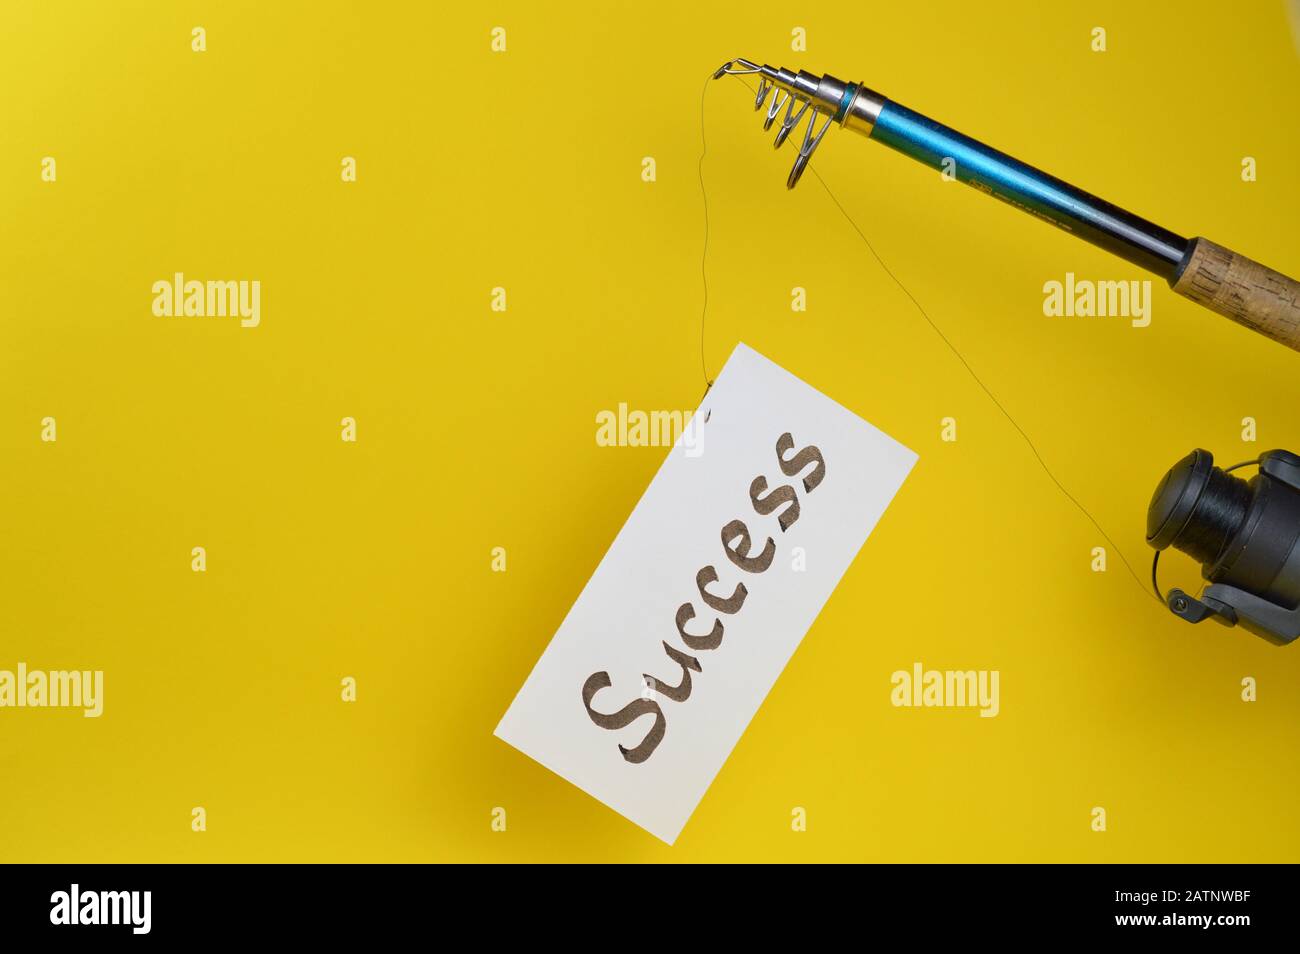 fishing line with piece of paper hanging of as symbol for temptation in front of yellow background Stock Photo